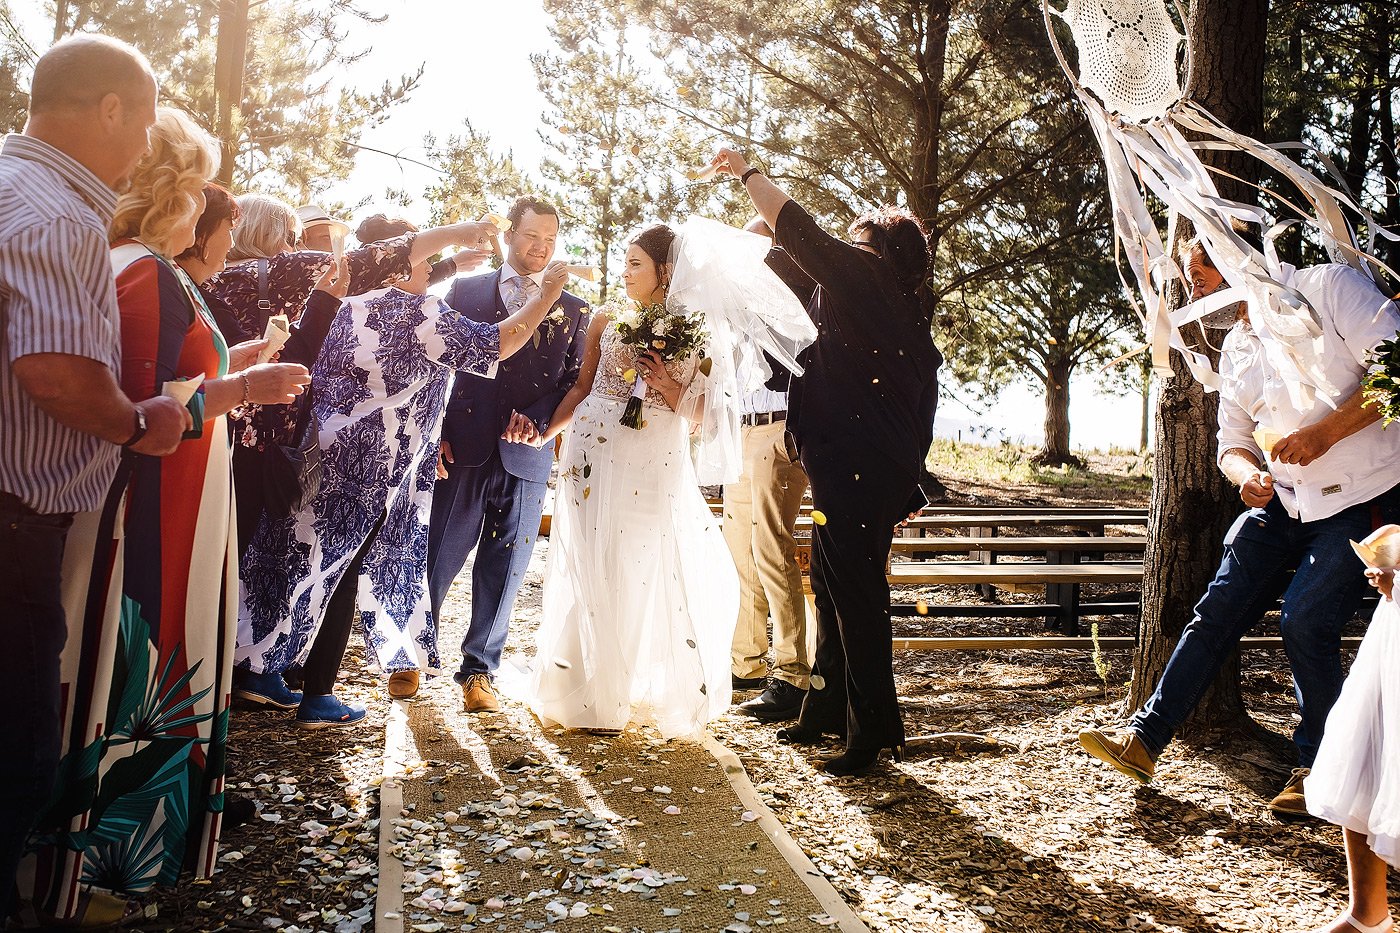 Bride and groom with flower petal confetti